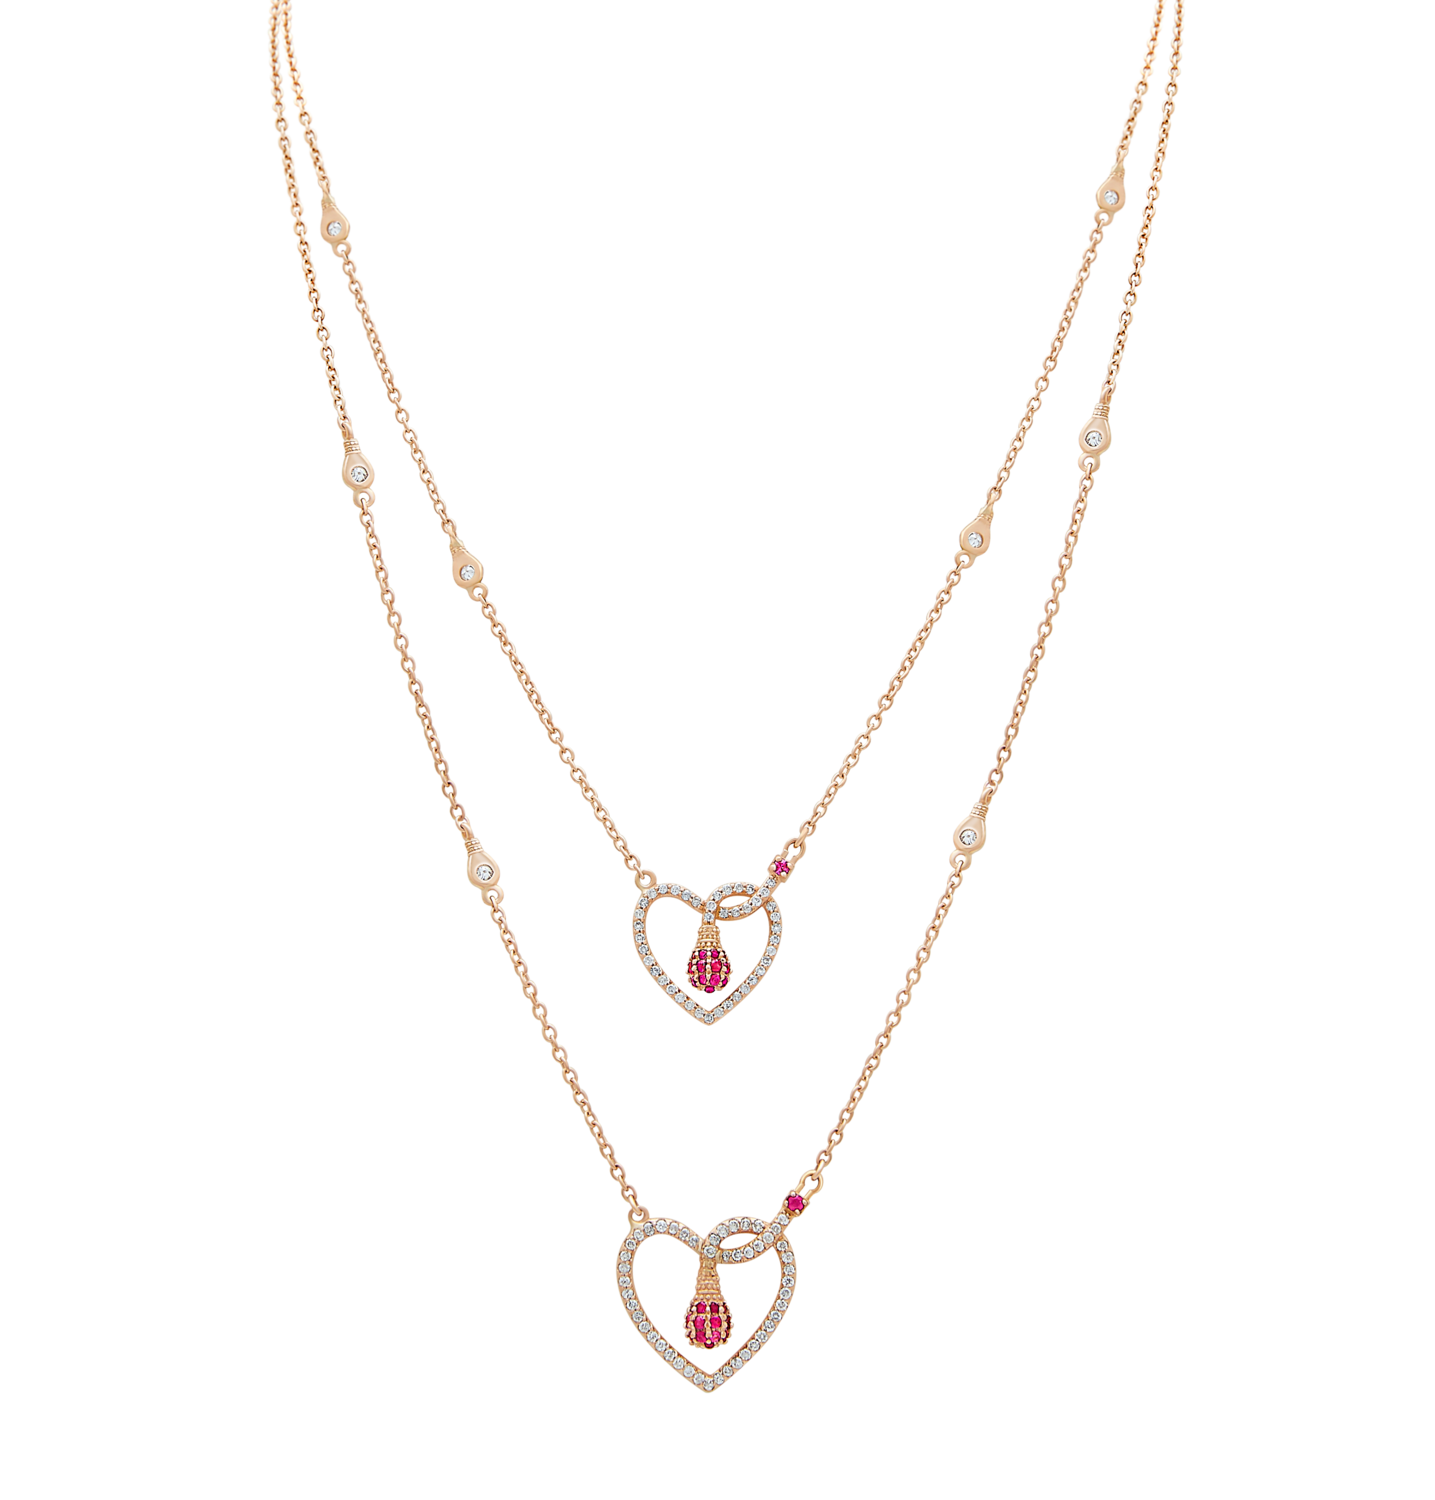 Light Hearts Diamond Necklace with Ruby